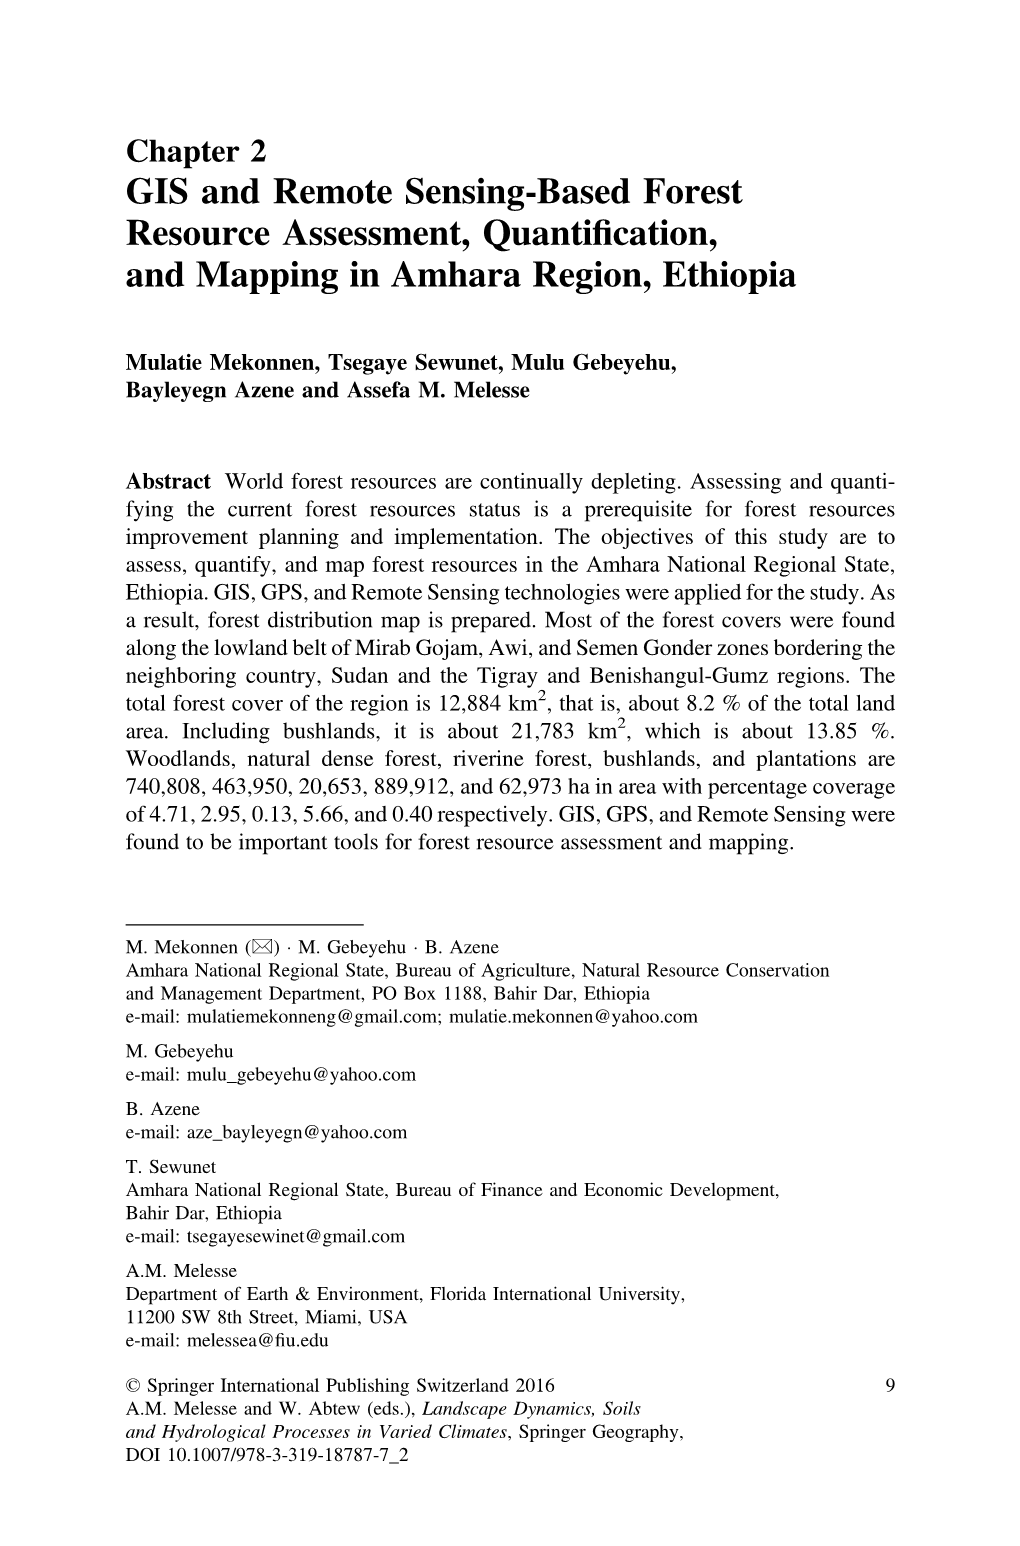 GIS and Remote Sensing-Based Forest Resource Assessment, Quantiﬁcation, and Mapping in Amhara Region, Ethiopia